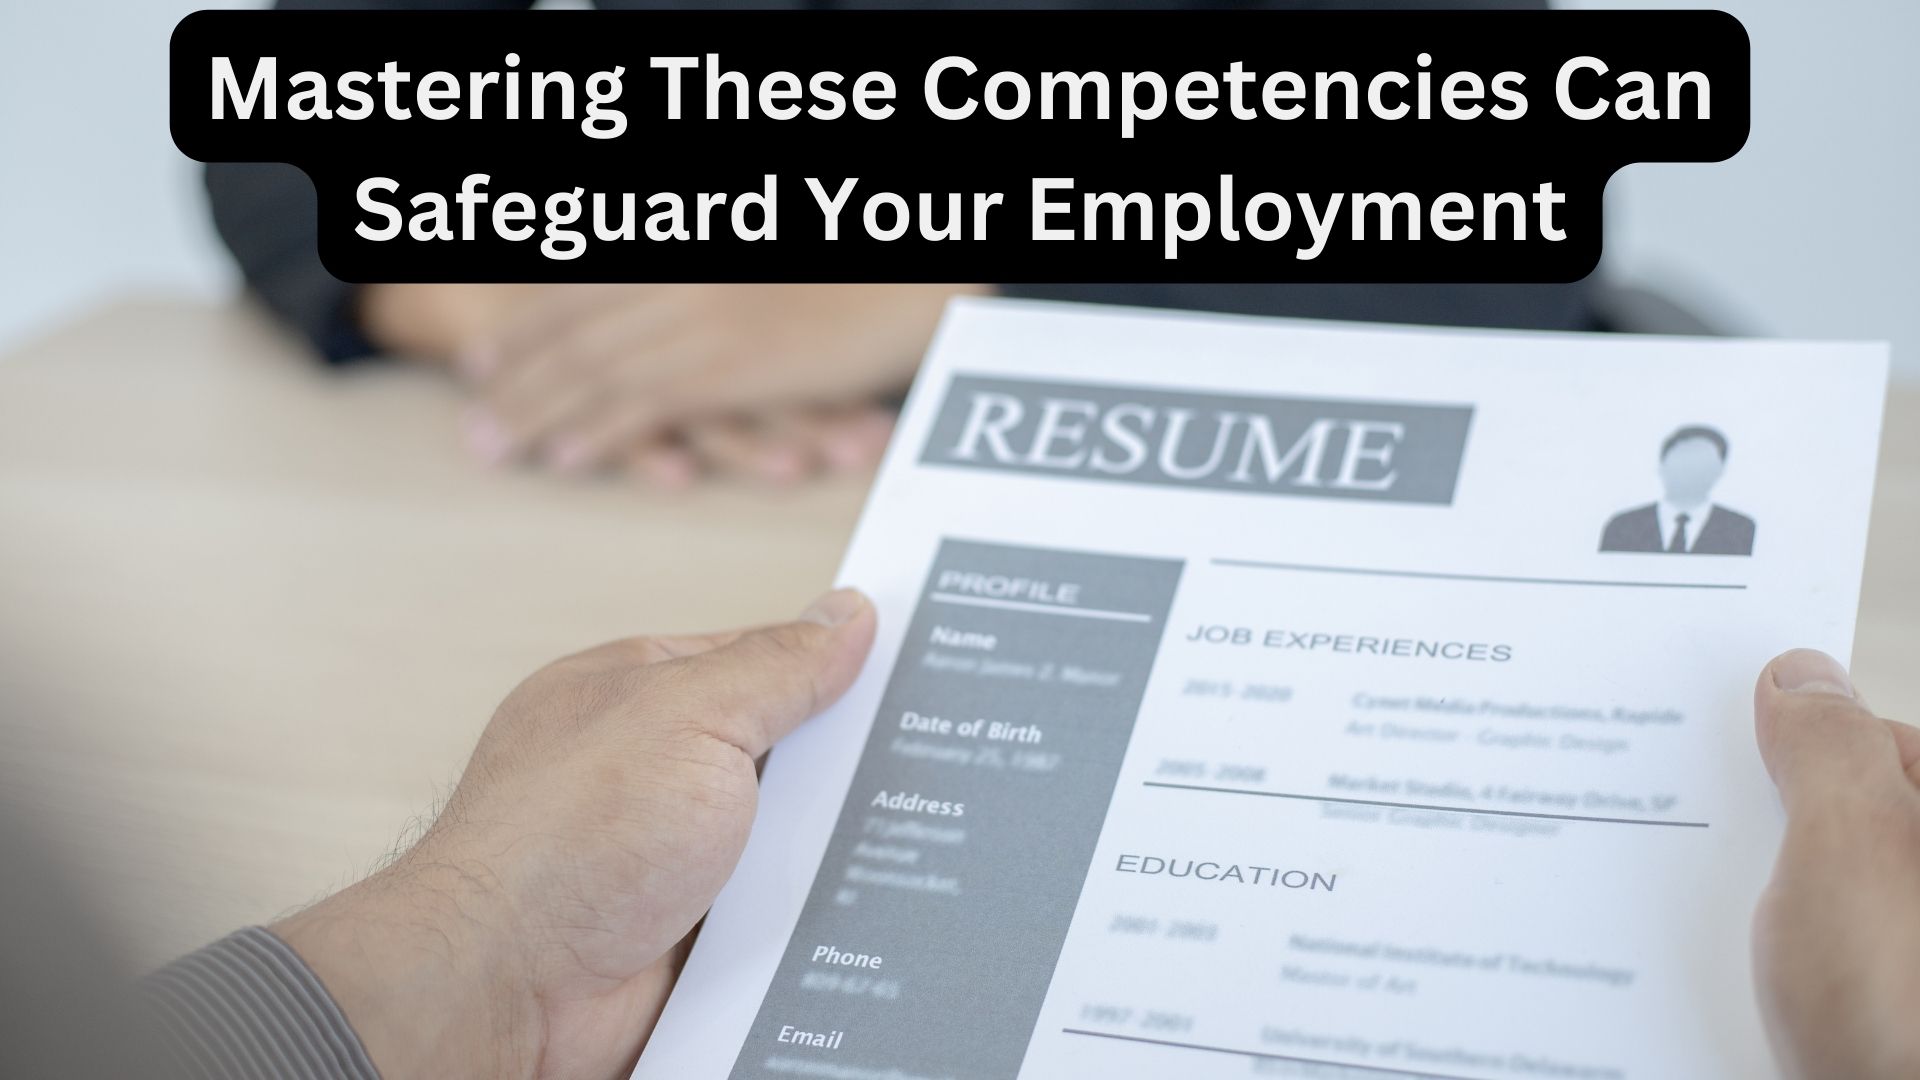 Mastering These Competencies Can Safeguard Your Employment